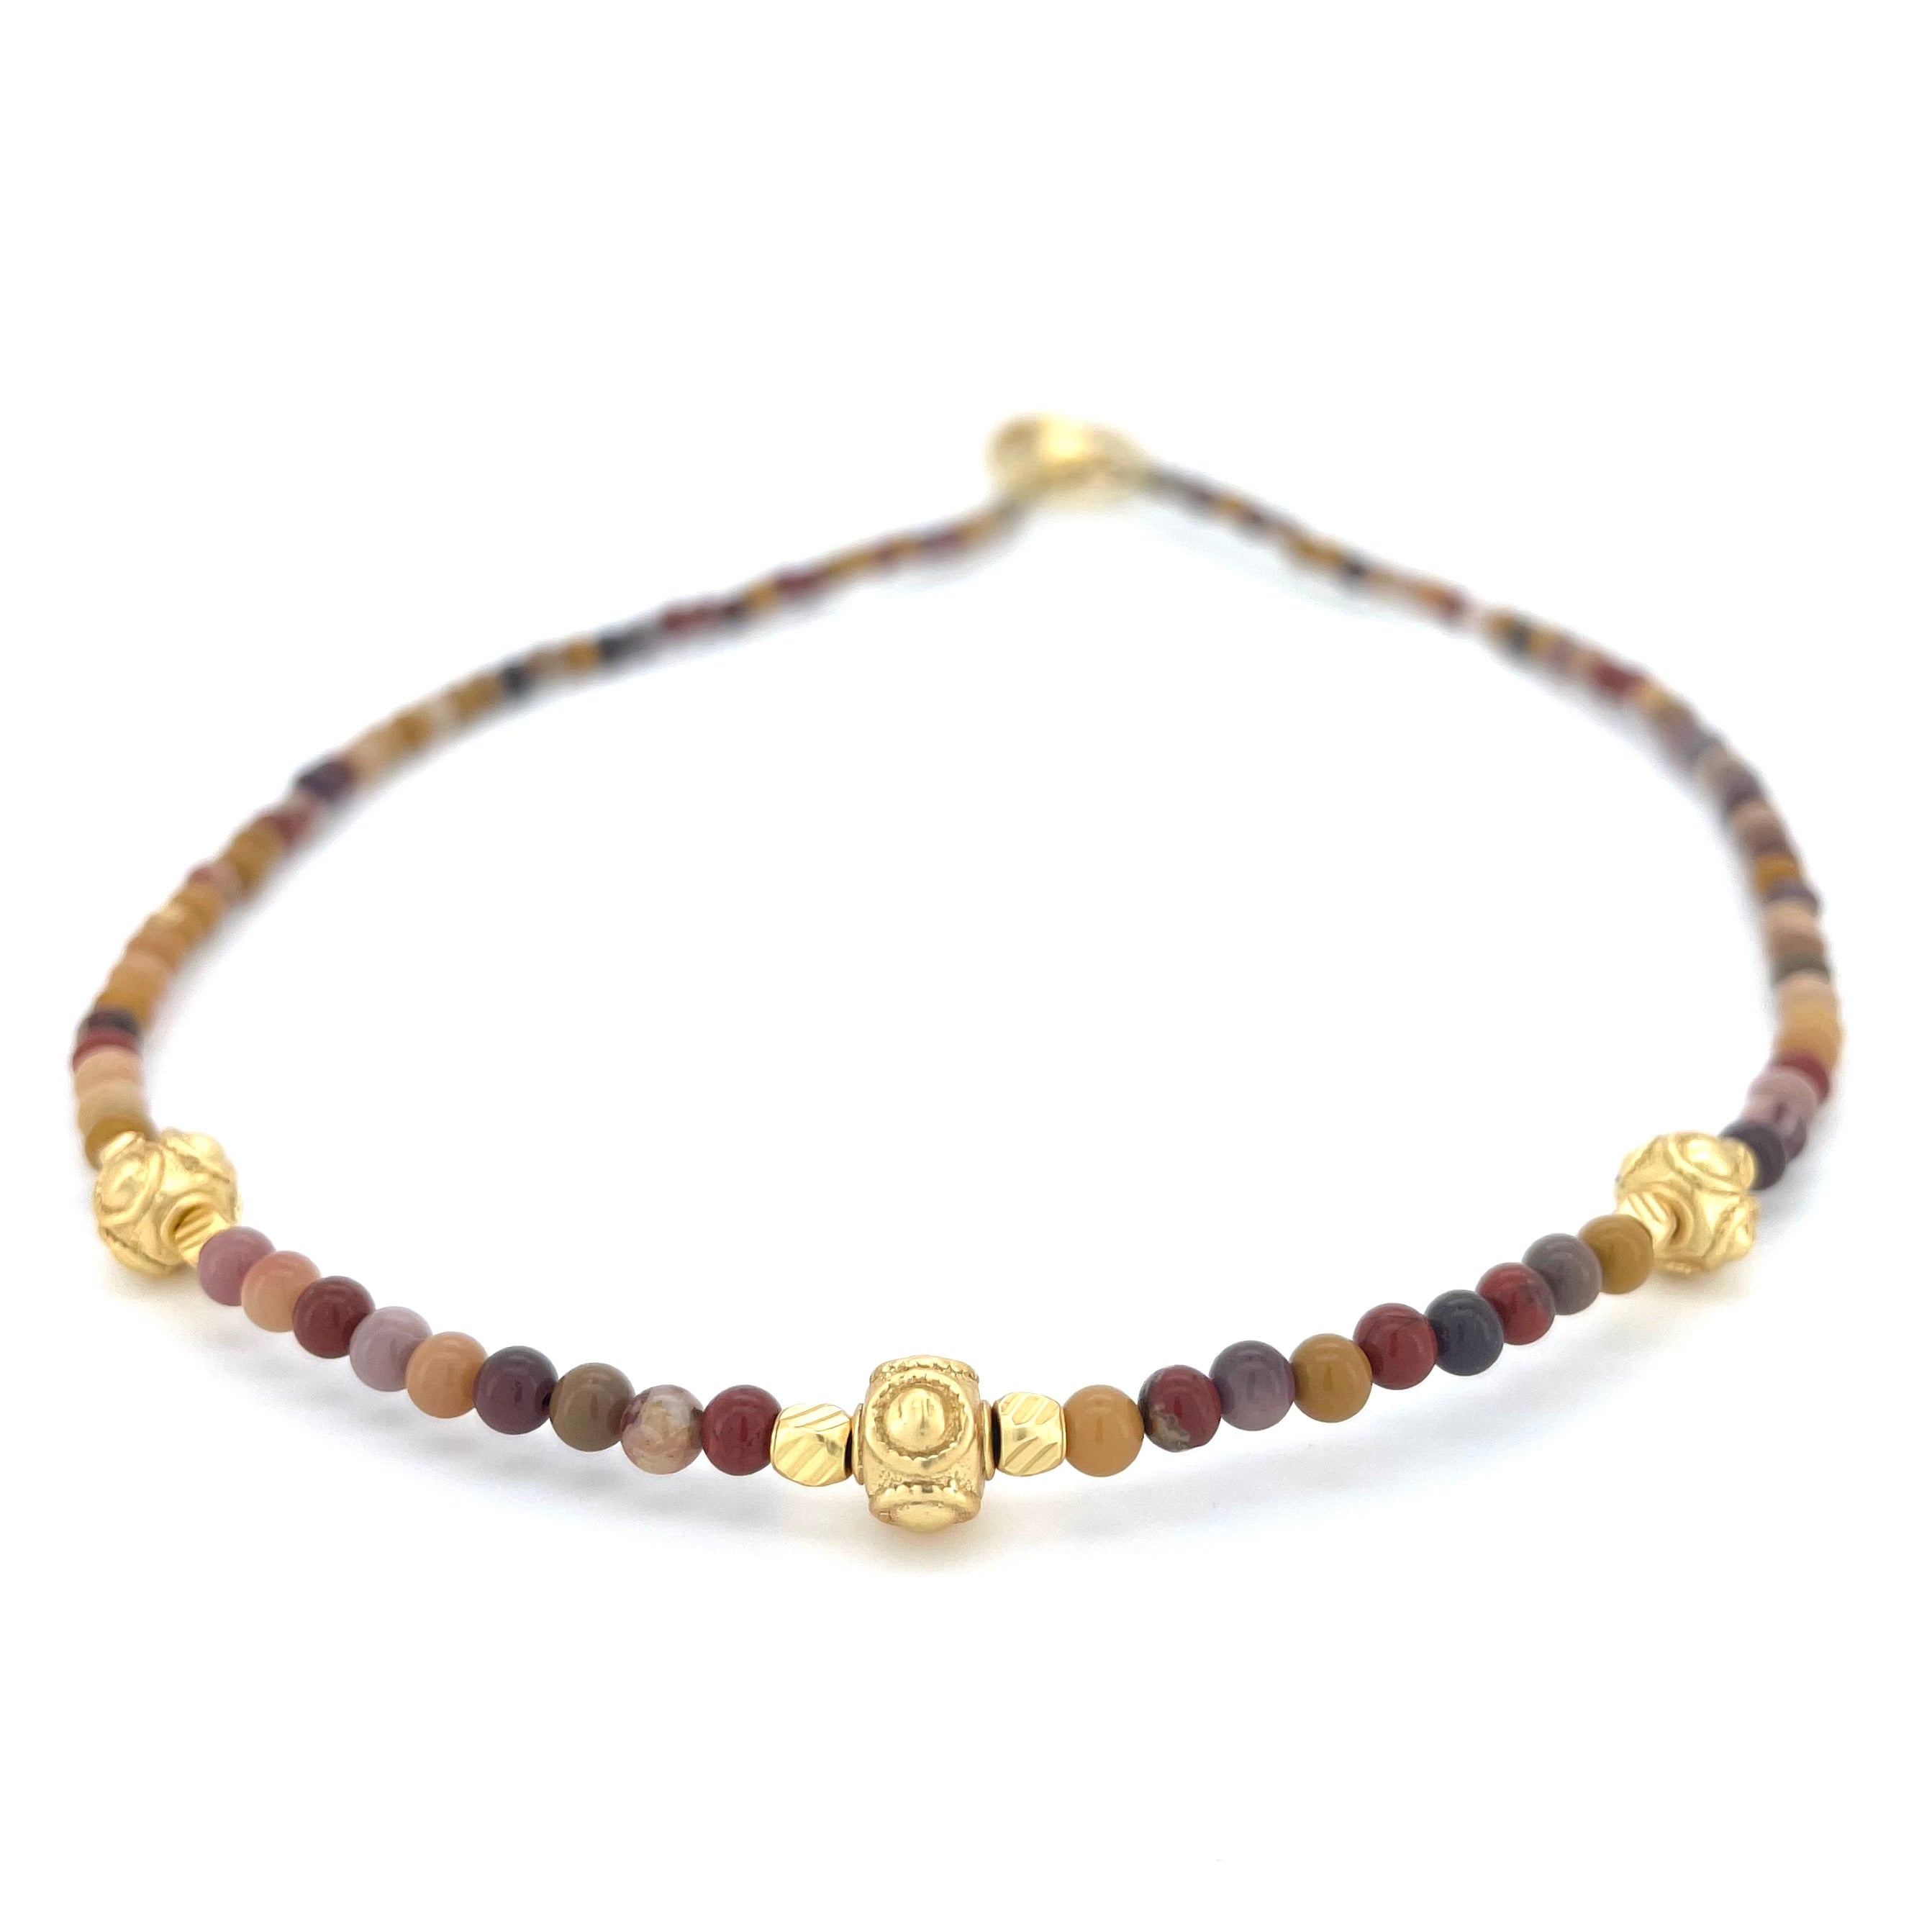 THE DAINTY- SUNS- Mookaite- NECKLACE - Headless Nation